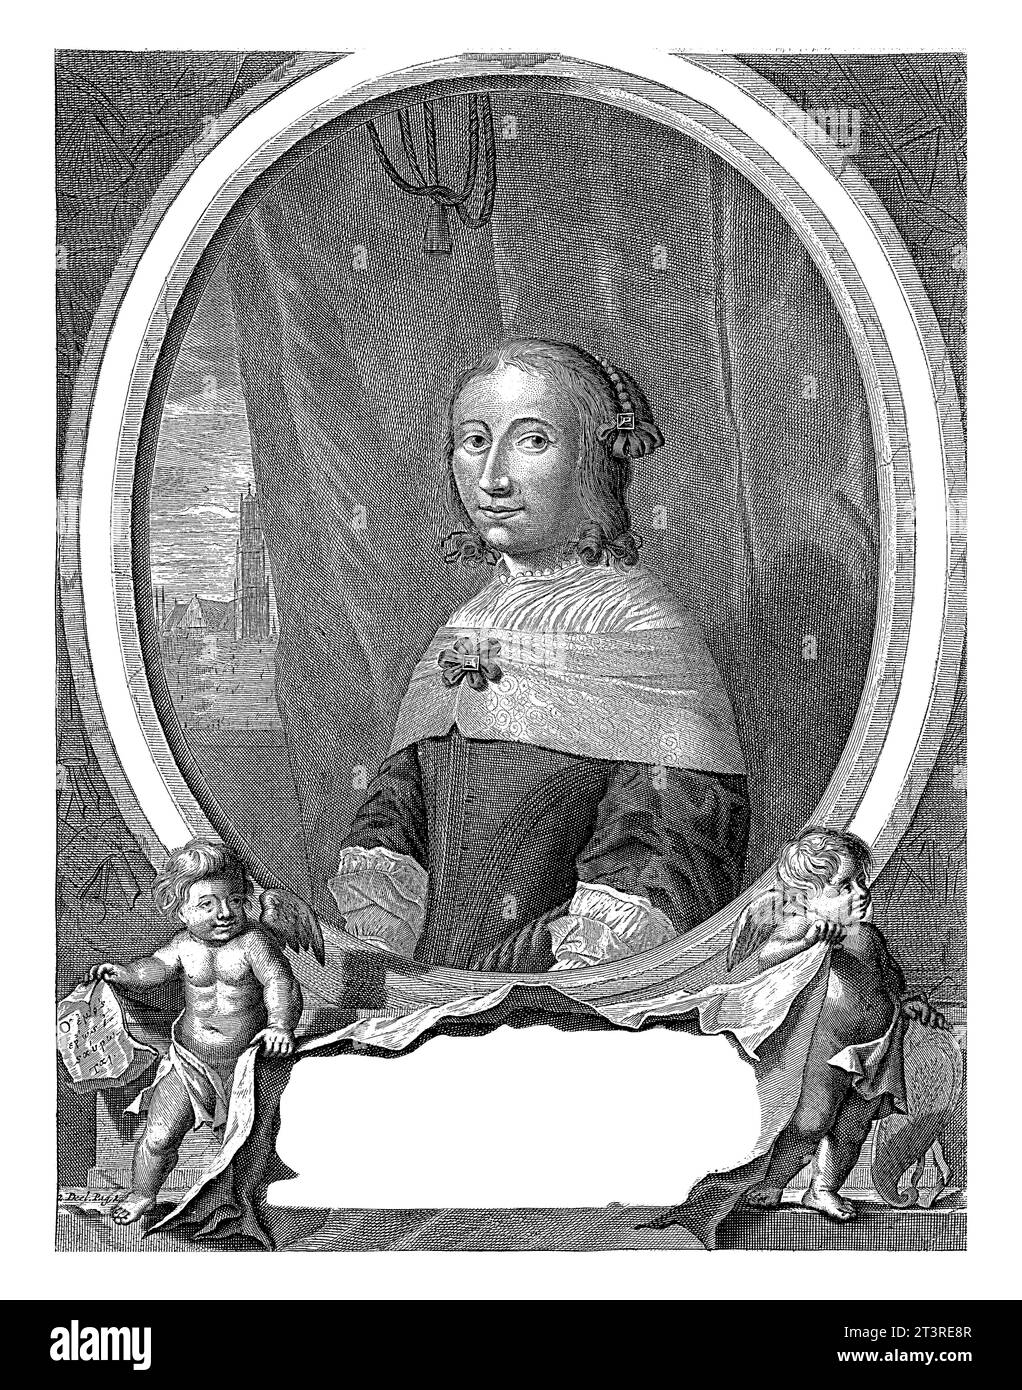 Portrait bust in oval to the left of Anna Maria van Schurman, artist and poetess, bareheaded. To the left of the person portrayed is a view of the Dom Stock Photo